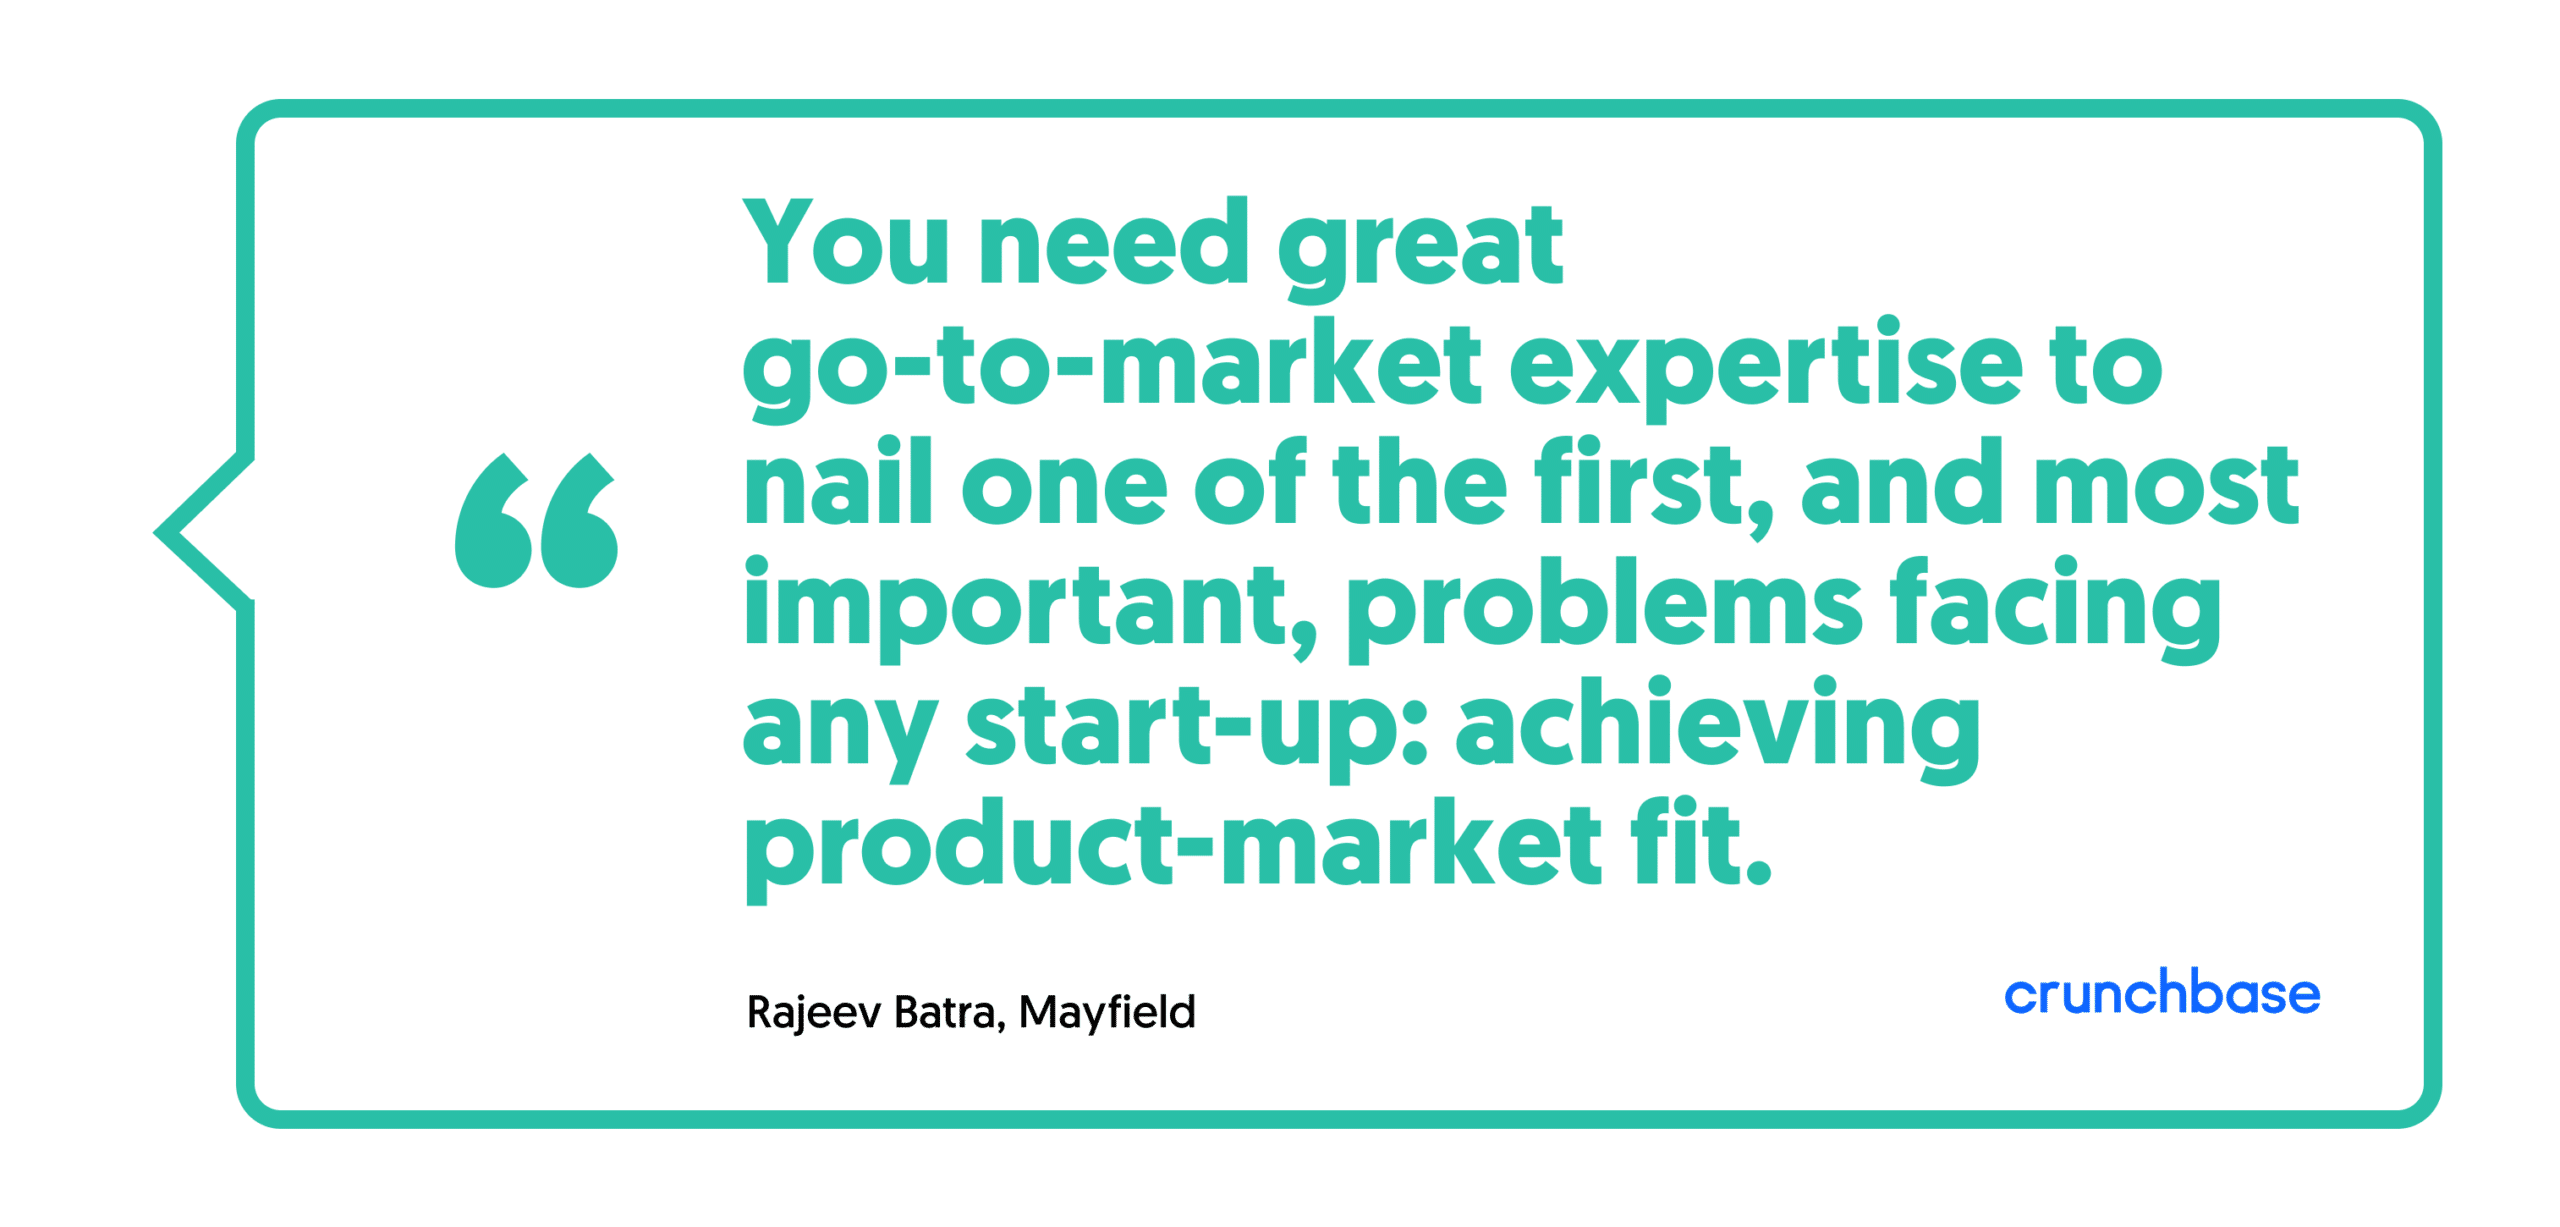 You need great go-to-market expertise to nail one of the first, and most important, problems facing any start-up: achieving product-market fit - Rajeev Batra, Mayfield